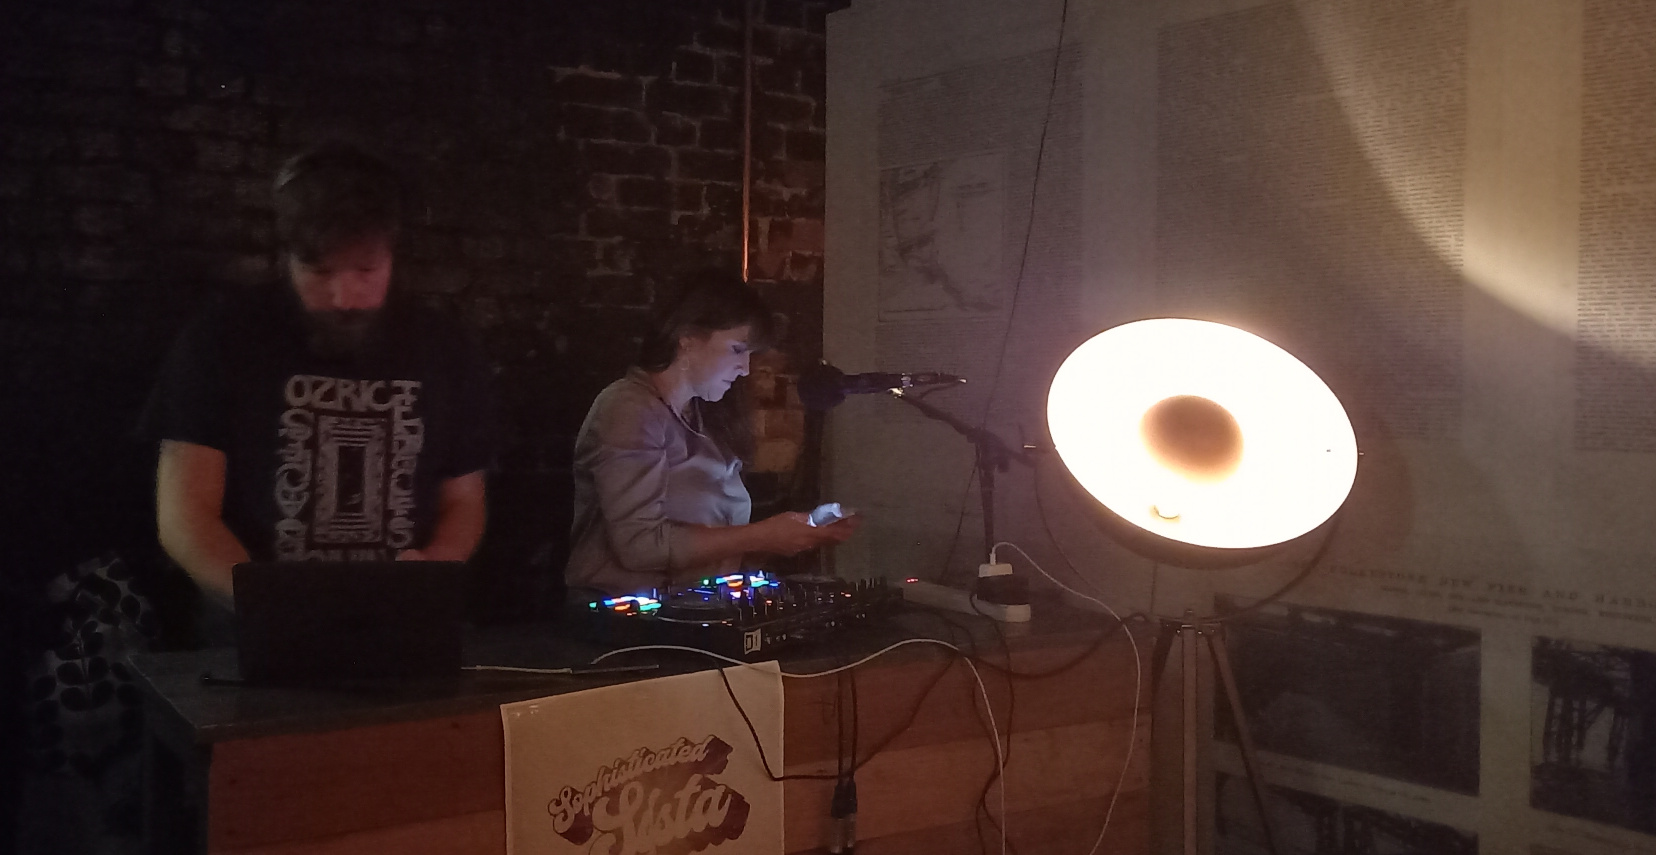 Lizzie D DJing at The Waiting Room